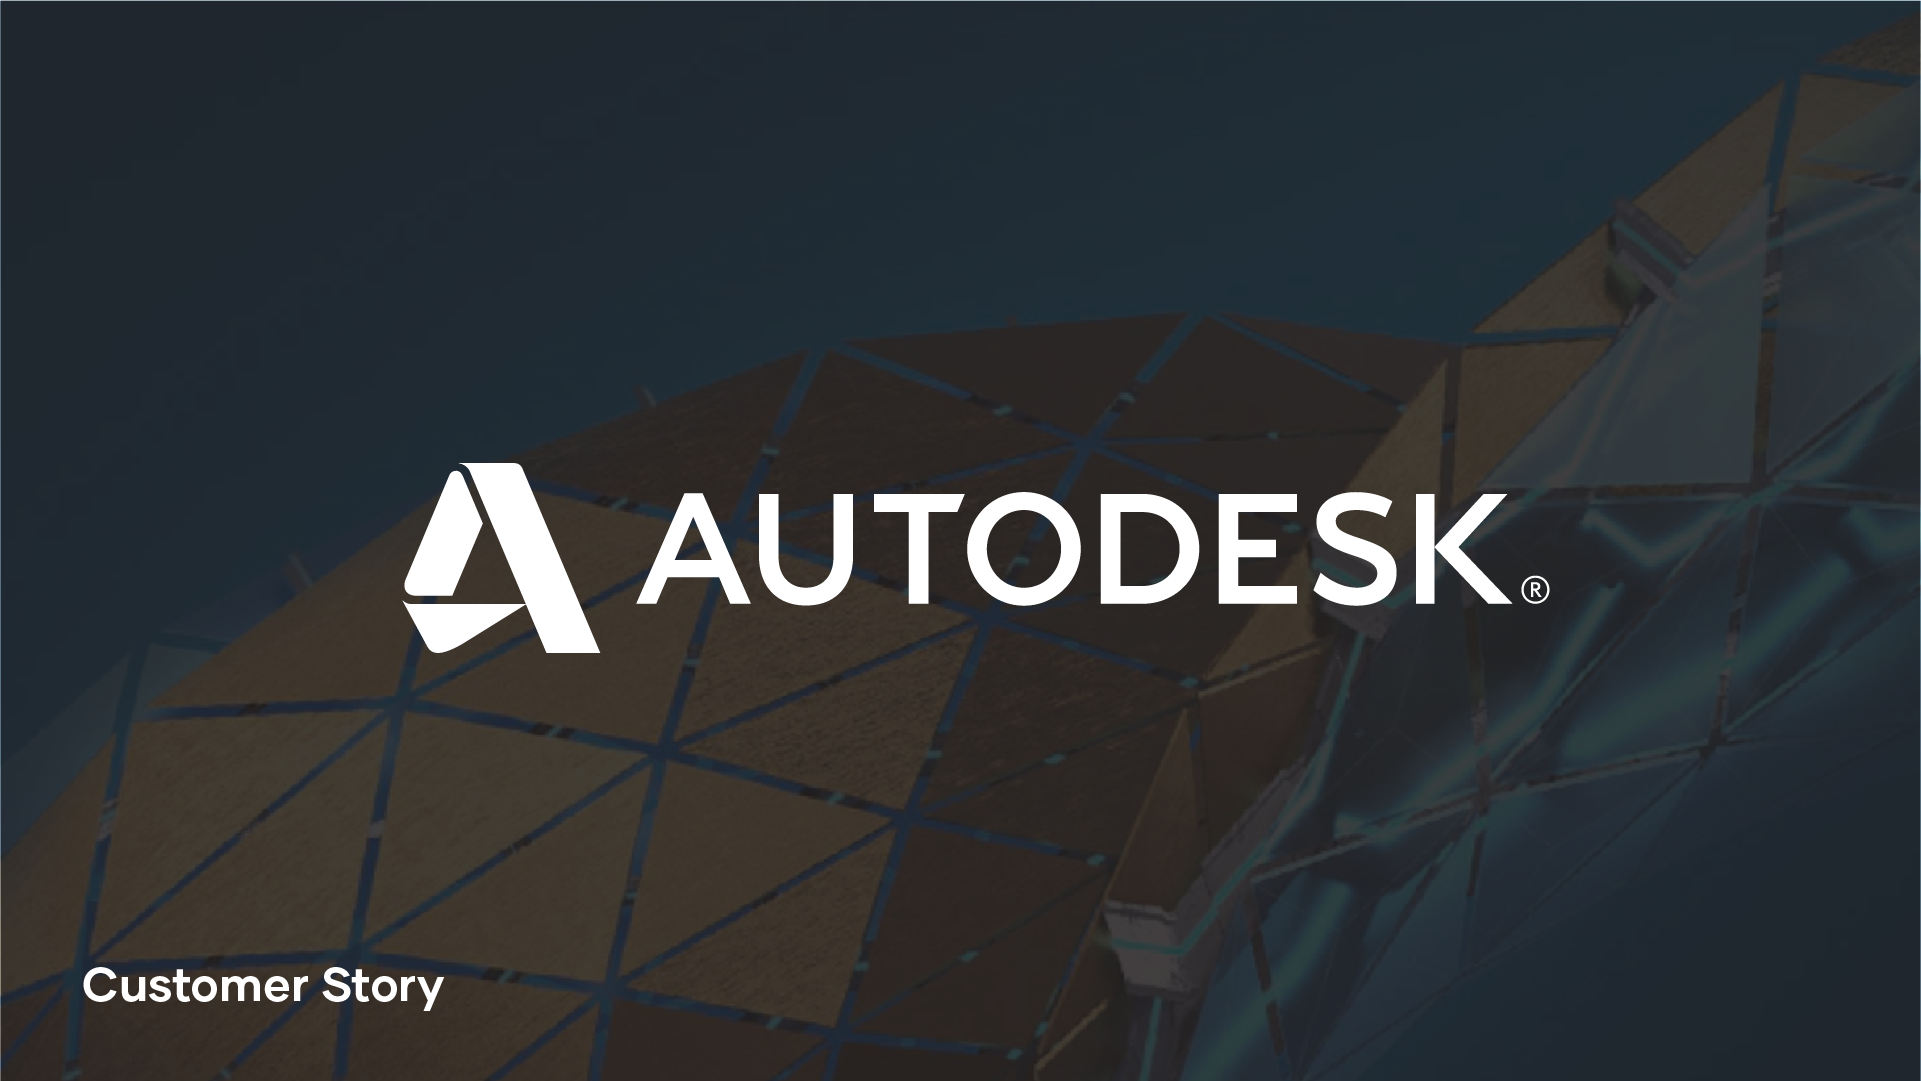 How Autodesk Uses HashiCorp Nomad to Modernize the Workflow of Making Things 